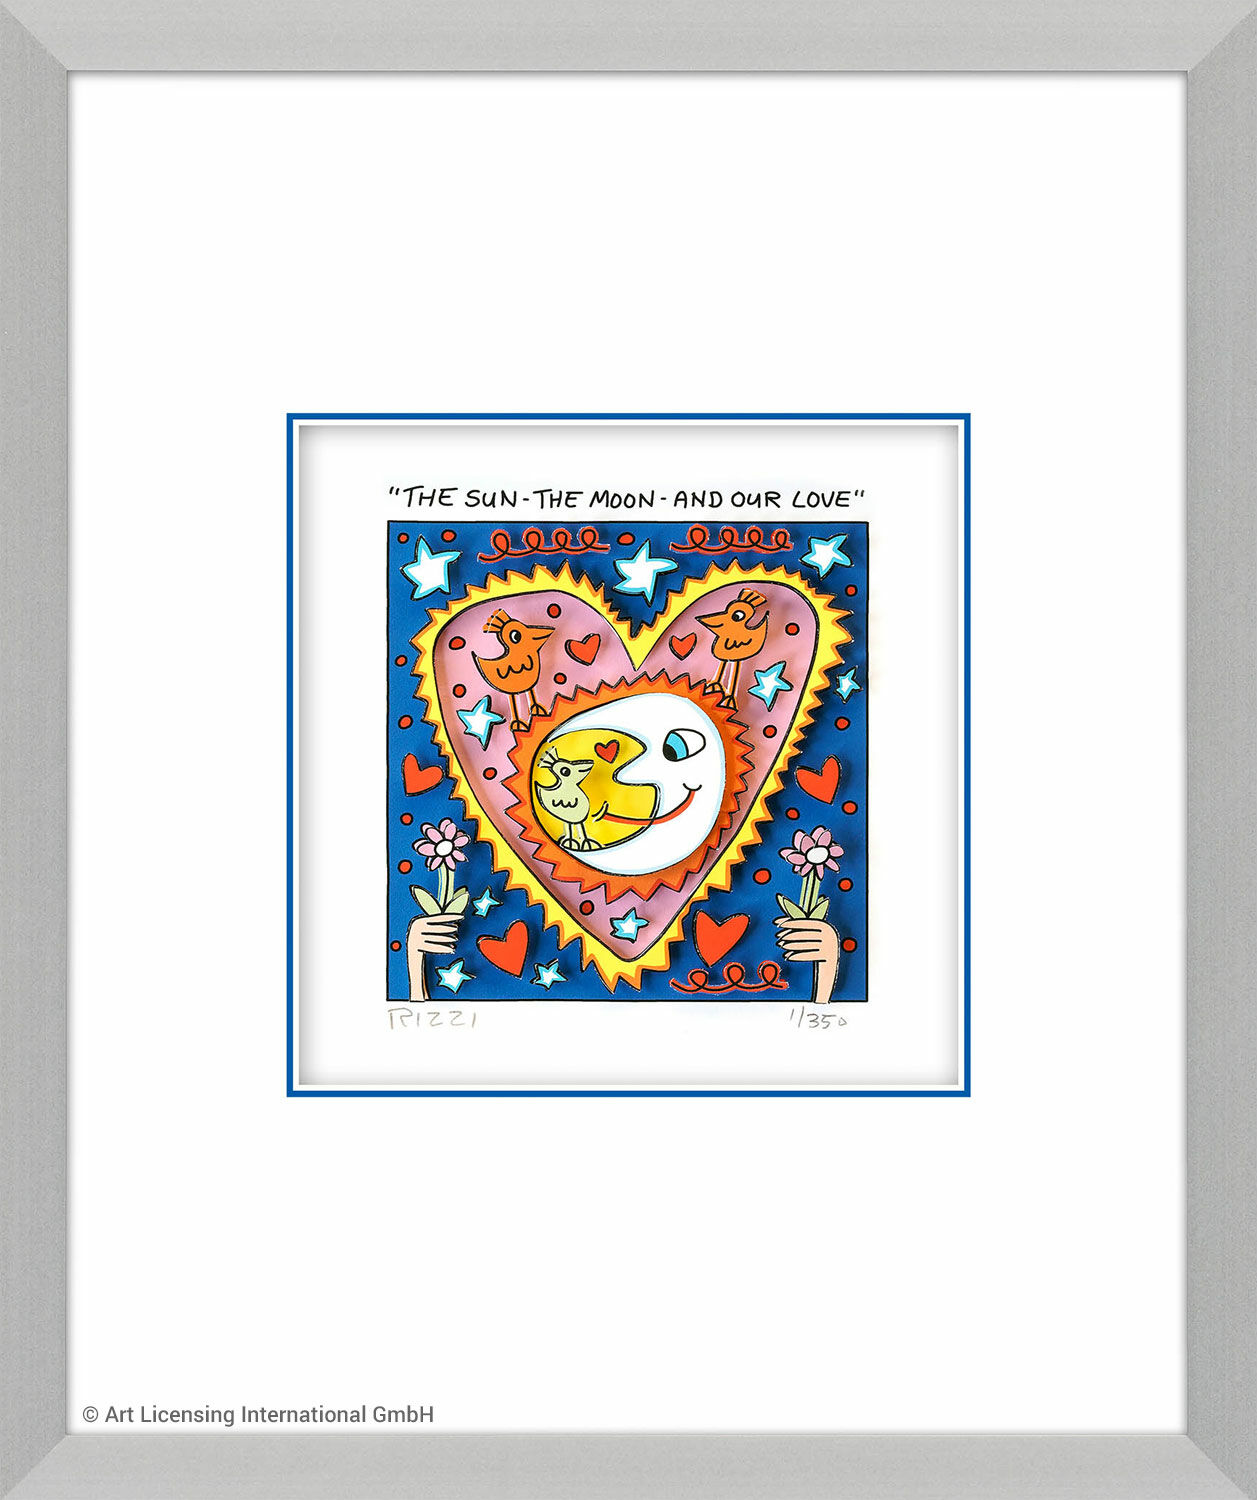 3D Picture "The Sun - The Moon - And our Love" (2022), framed by James Rizzi